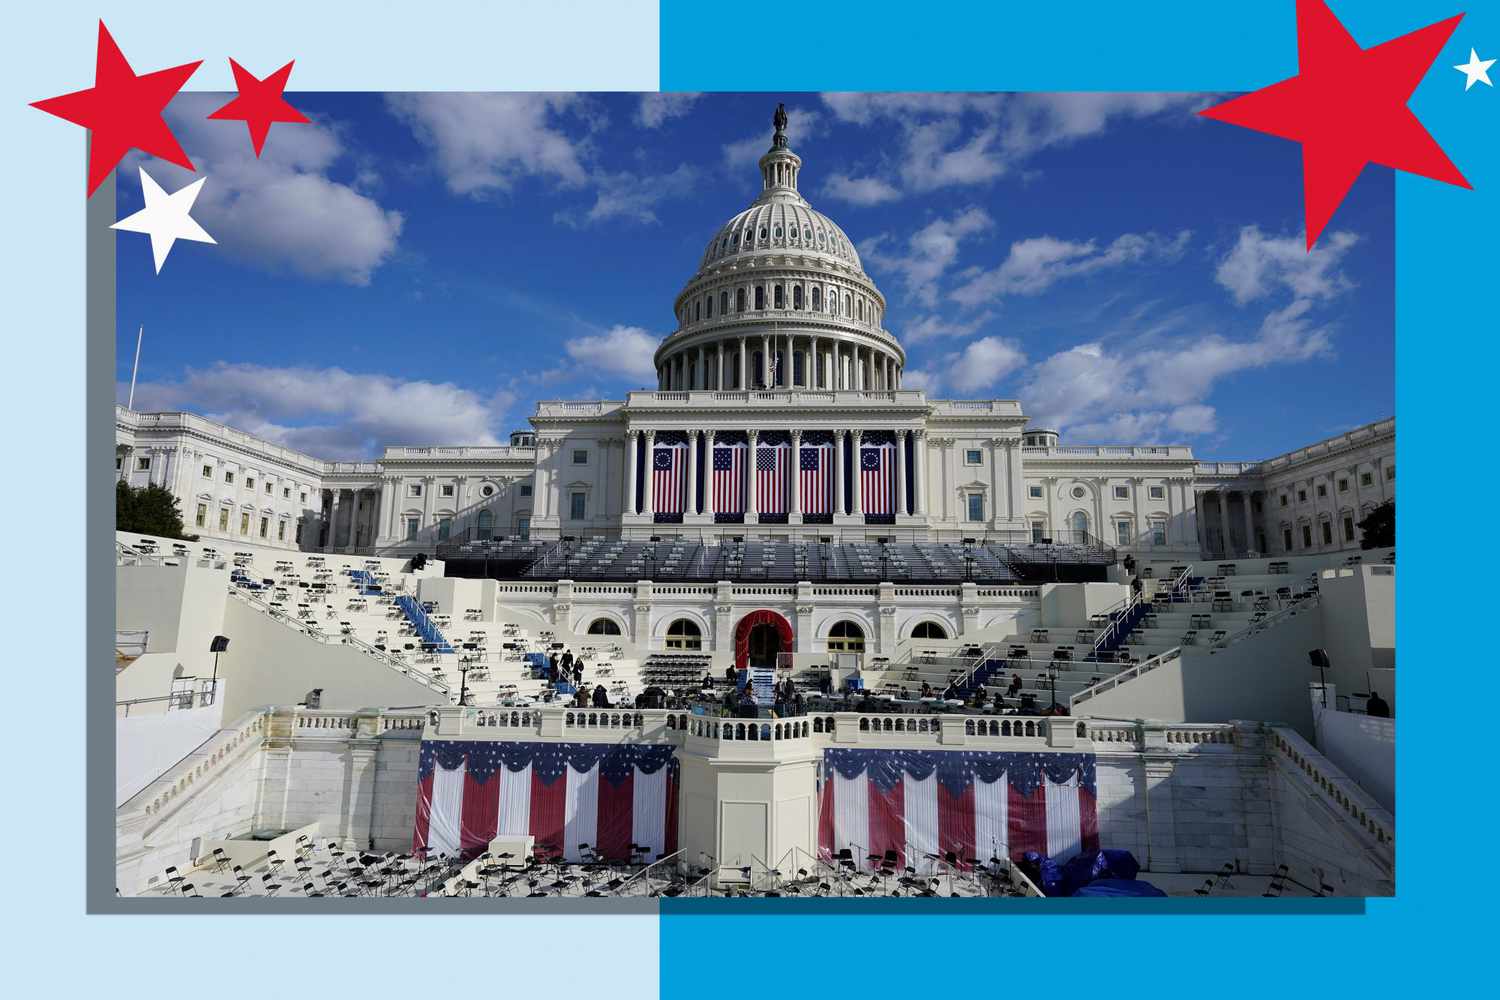 An image of the U.S. Capitol in preparation for the inauguration.